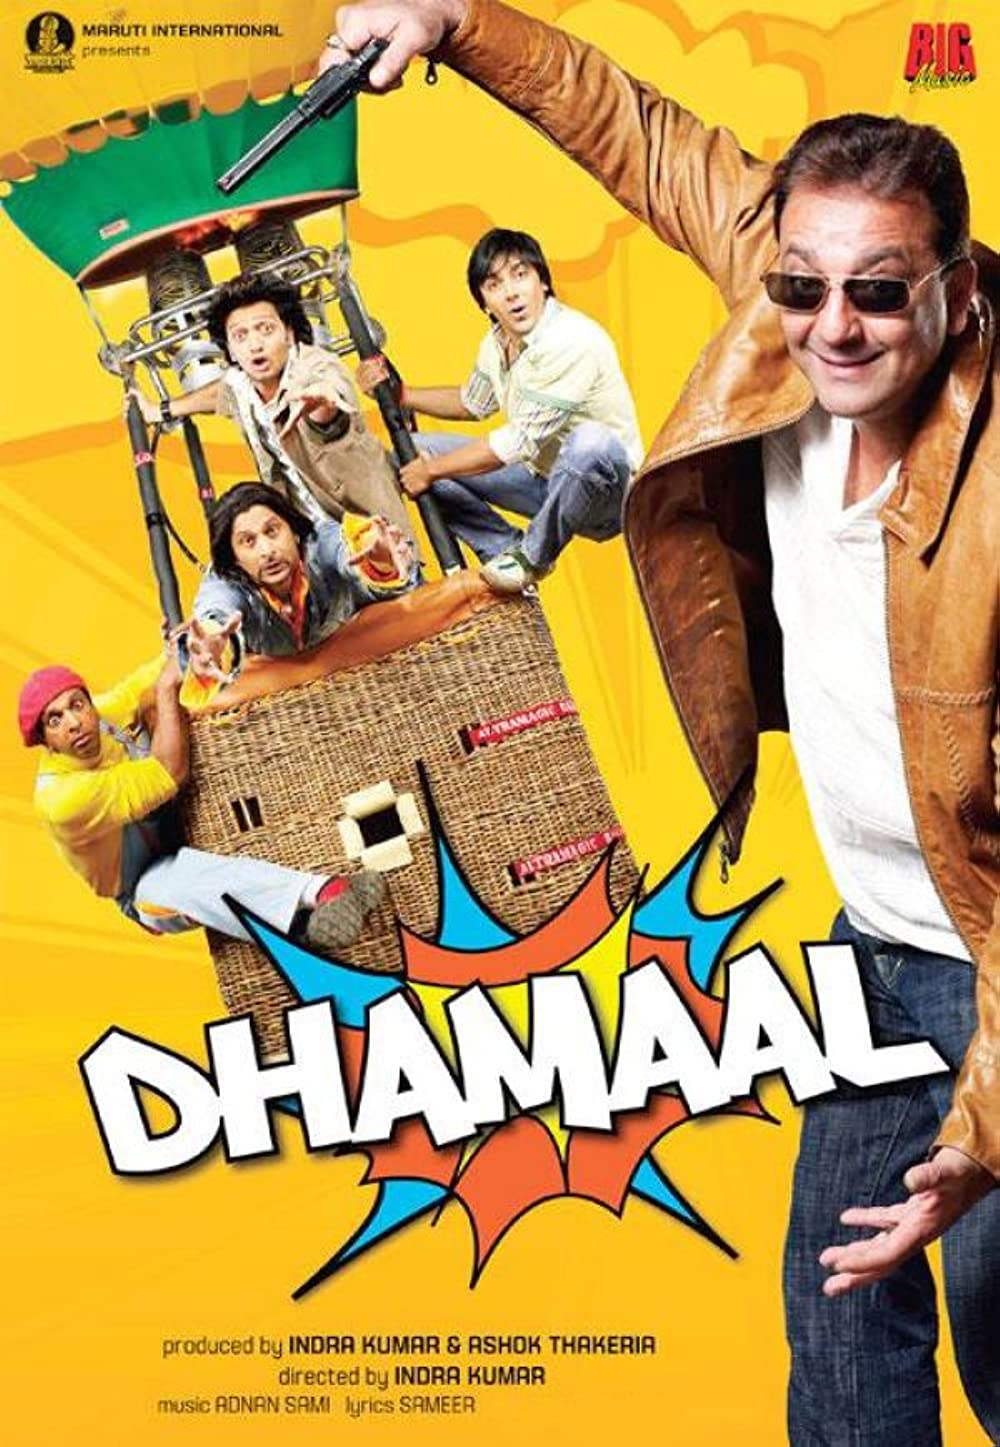 dhamaal-hindi-comedy-movies-on-amazon-prime - Pop Culture, Entertainment,  Humor, Travel & More